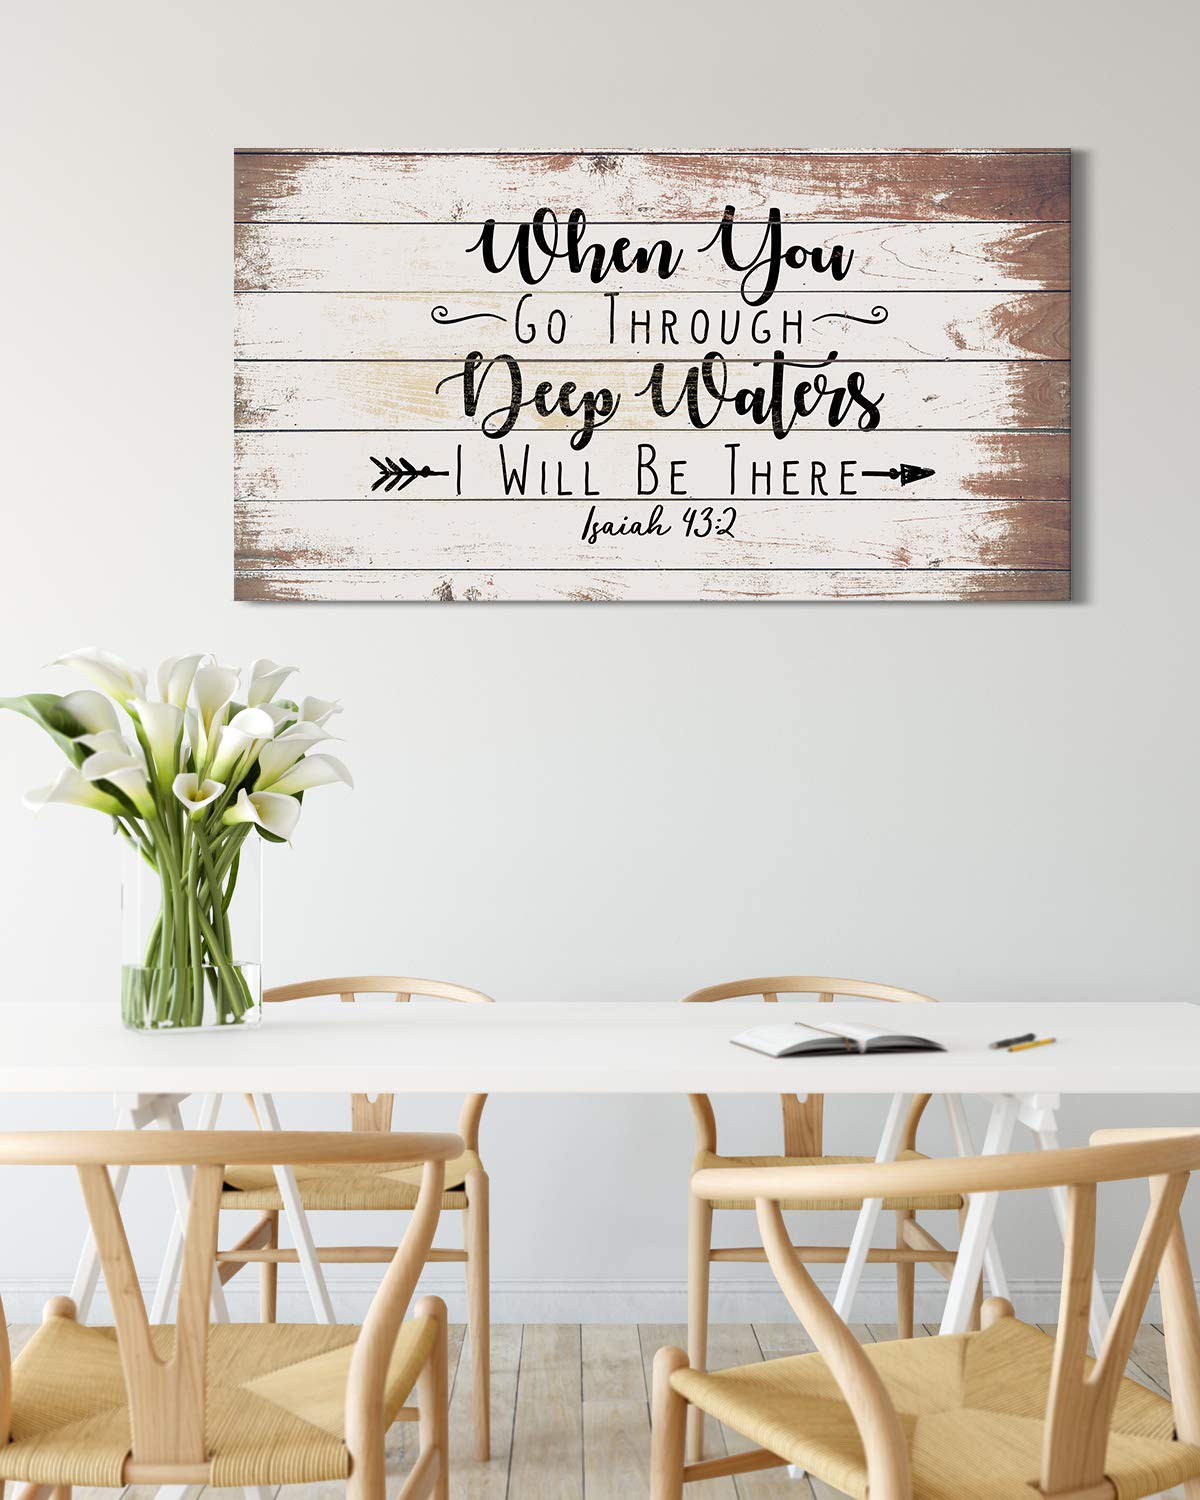 When You Go Through Deep Waters I Will Be There Isaiah 43:2 - Religious Wall Decor Art Canvas on Printed Woodgrain Background - Ready to Hang - Great for above a couch, table, bed or more